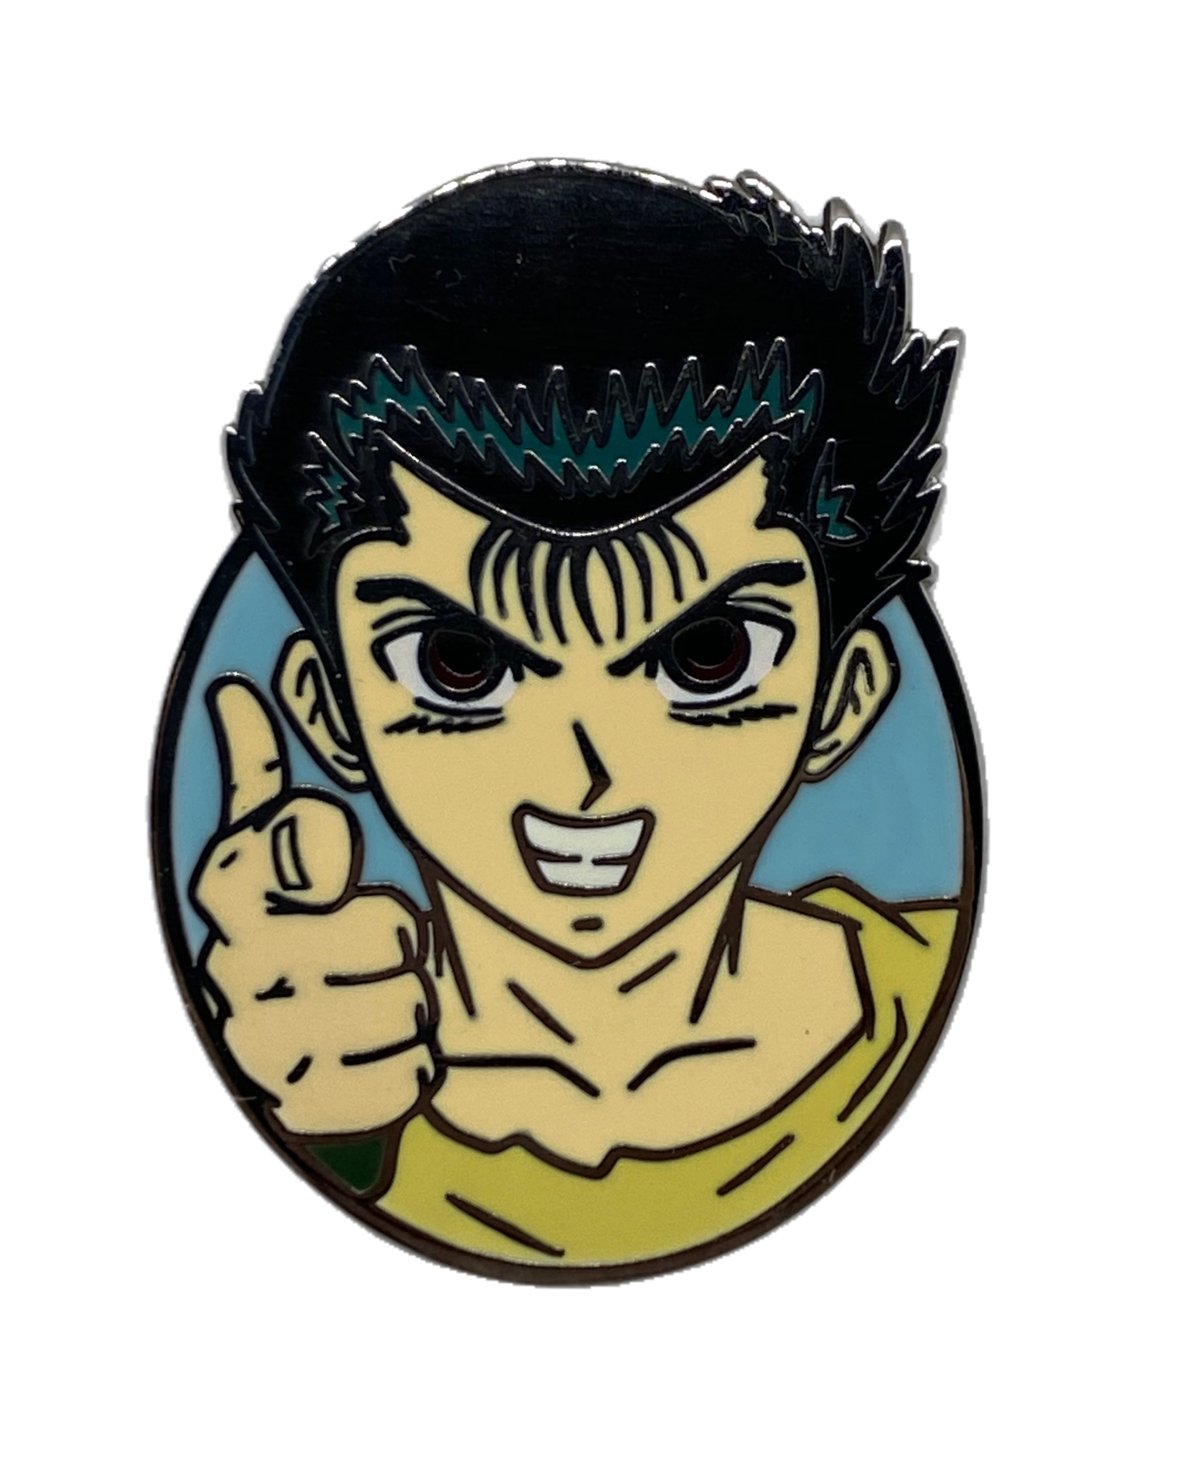 The Delinquent Hero Hard Enamel Pin